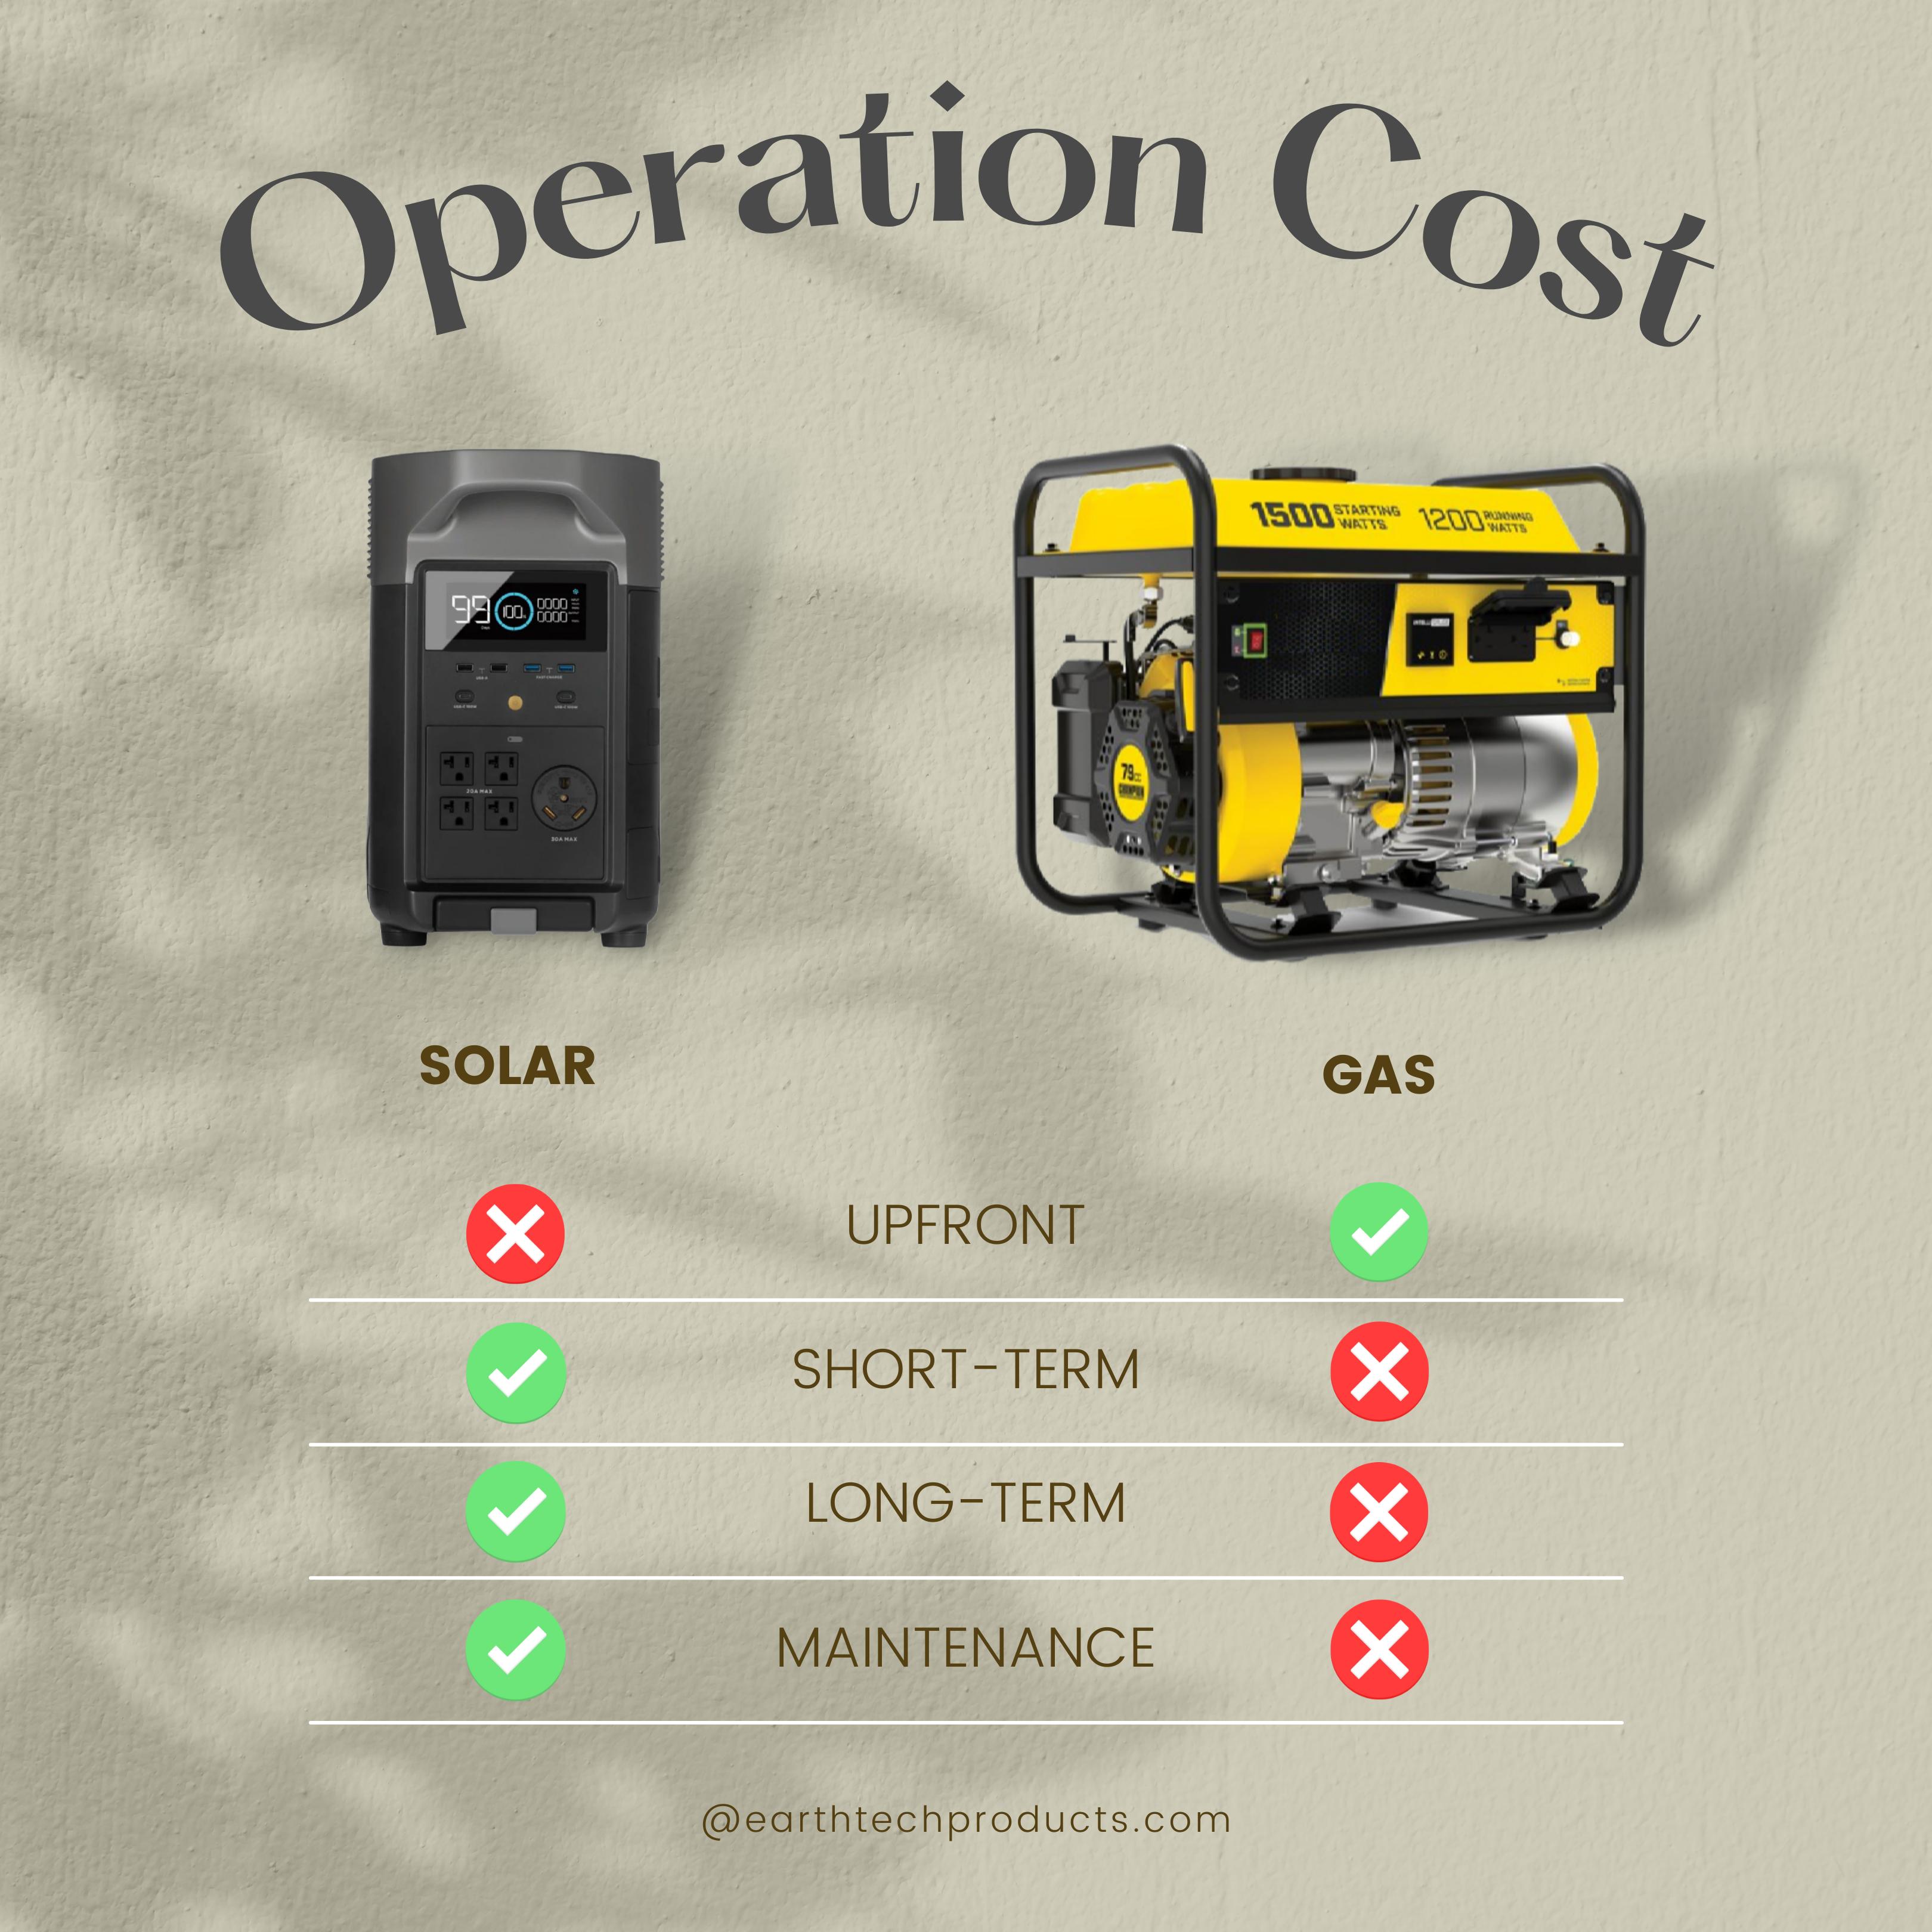 Solar Vs Gas Generator – Which is Better?